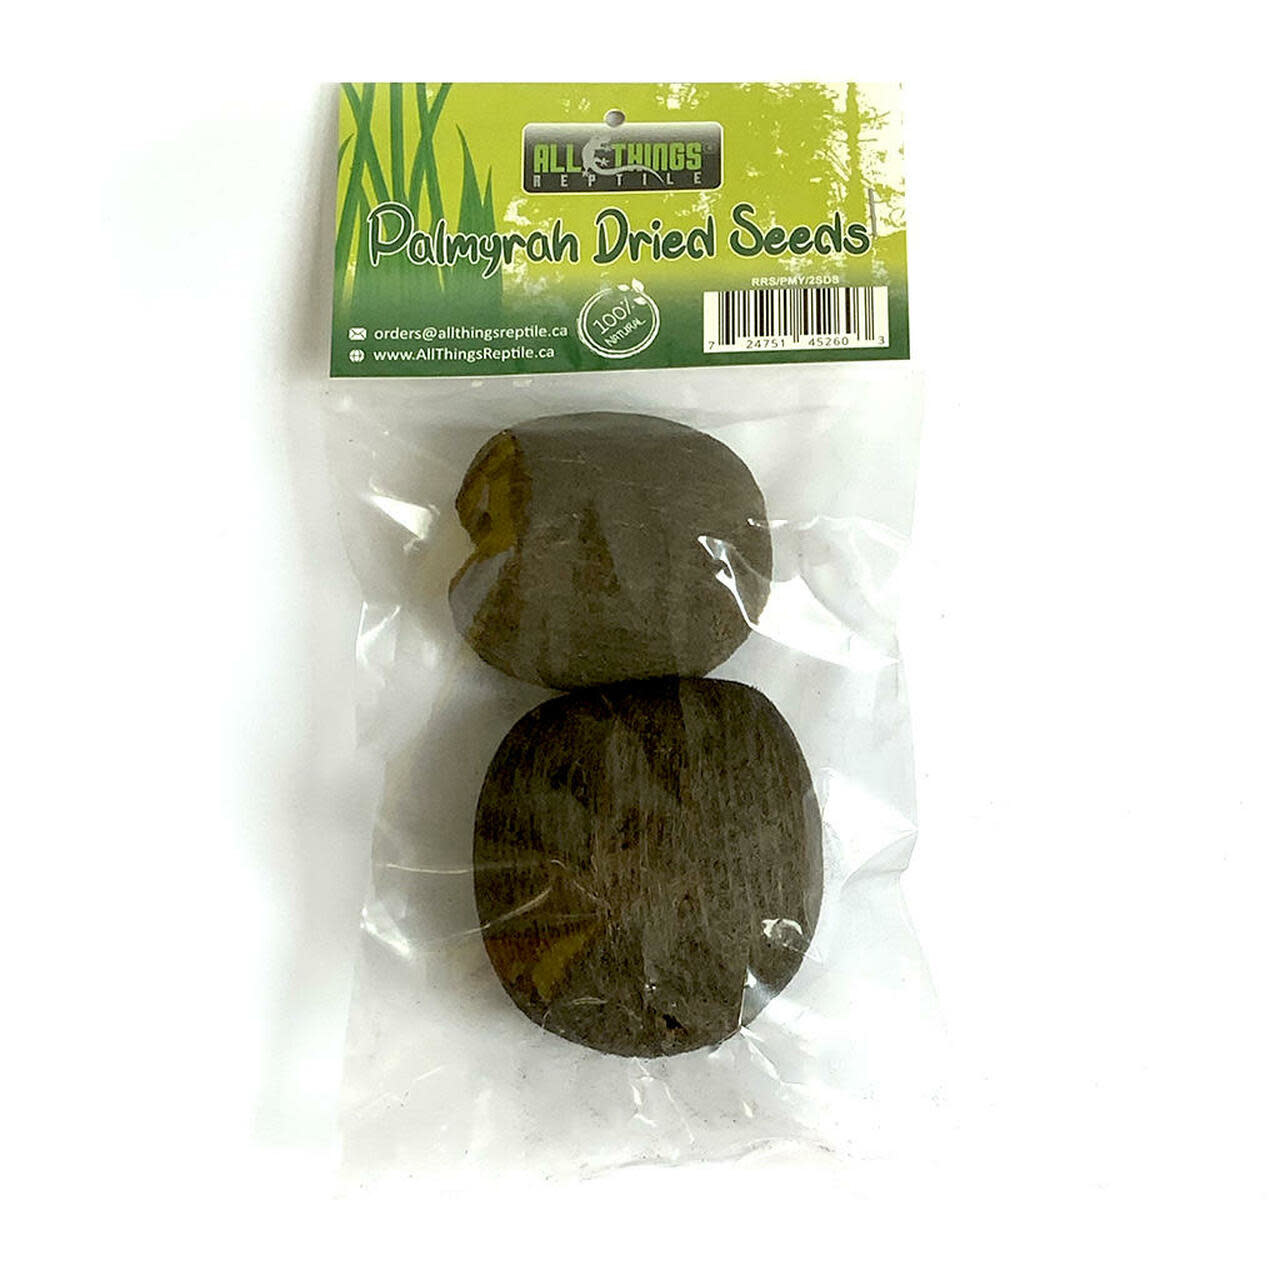 All things reptile Palmyrah Dried Seeds 2-pack